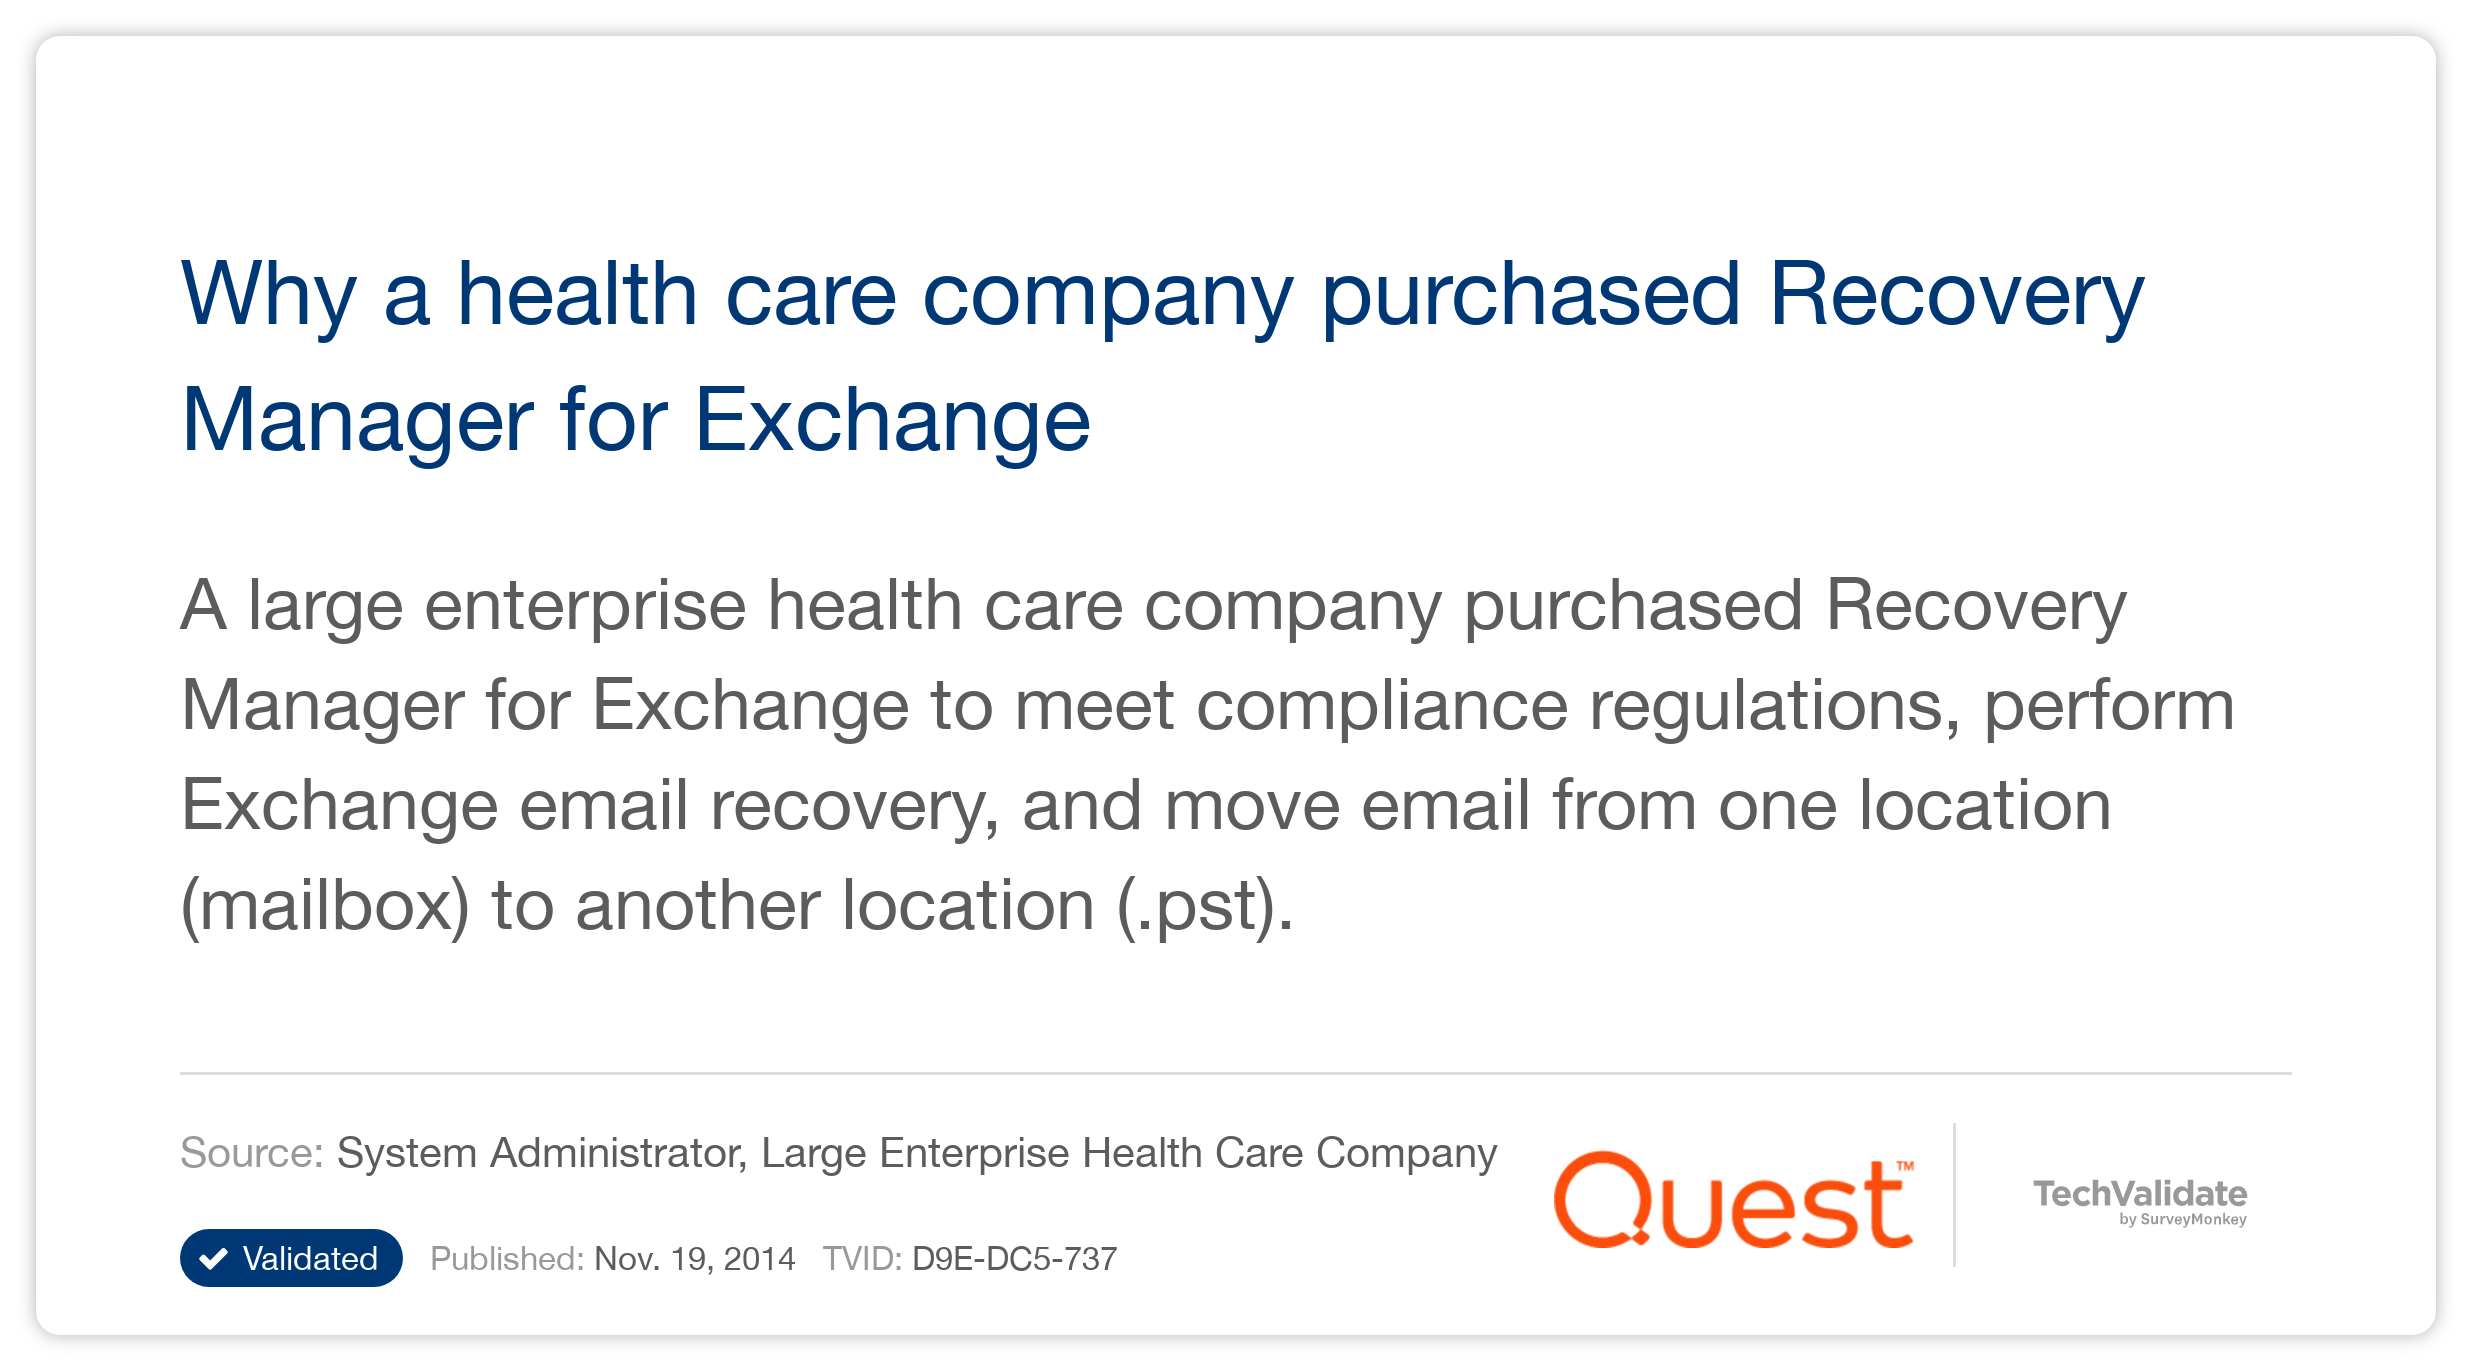 Why a health care company purchased Recovery Manager for Exchange